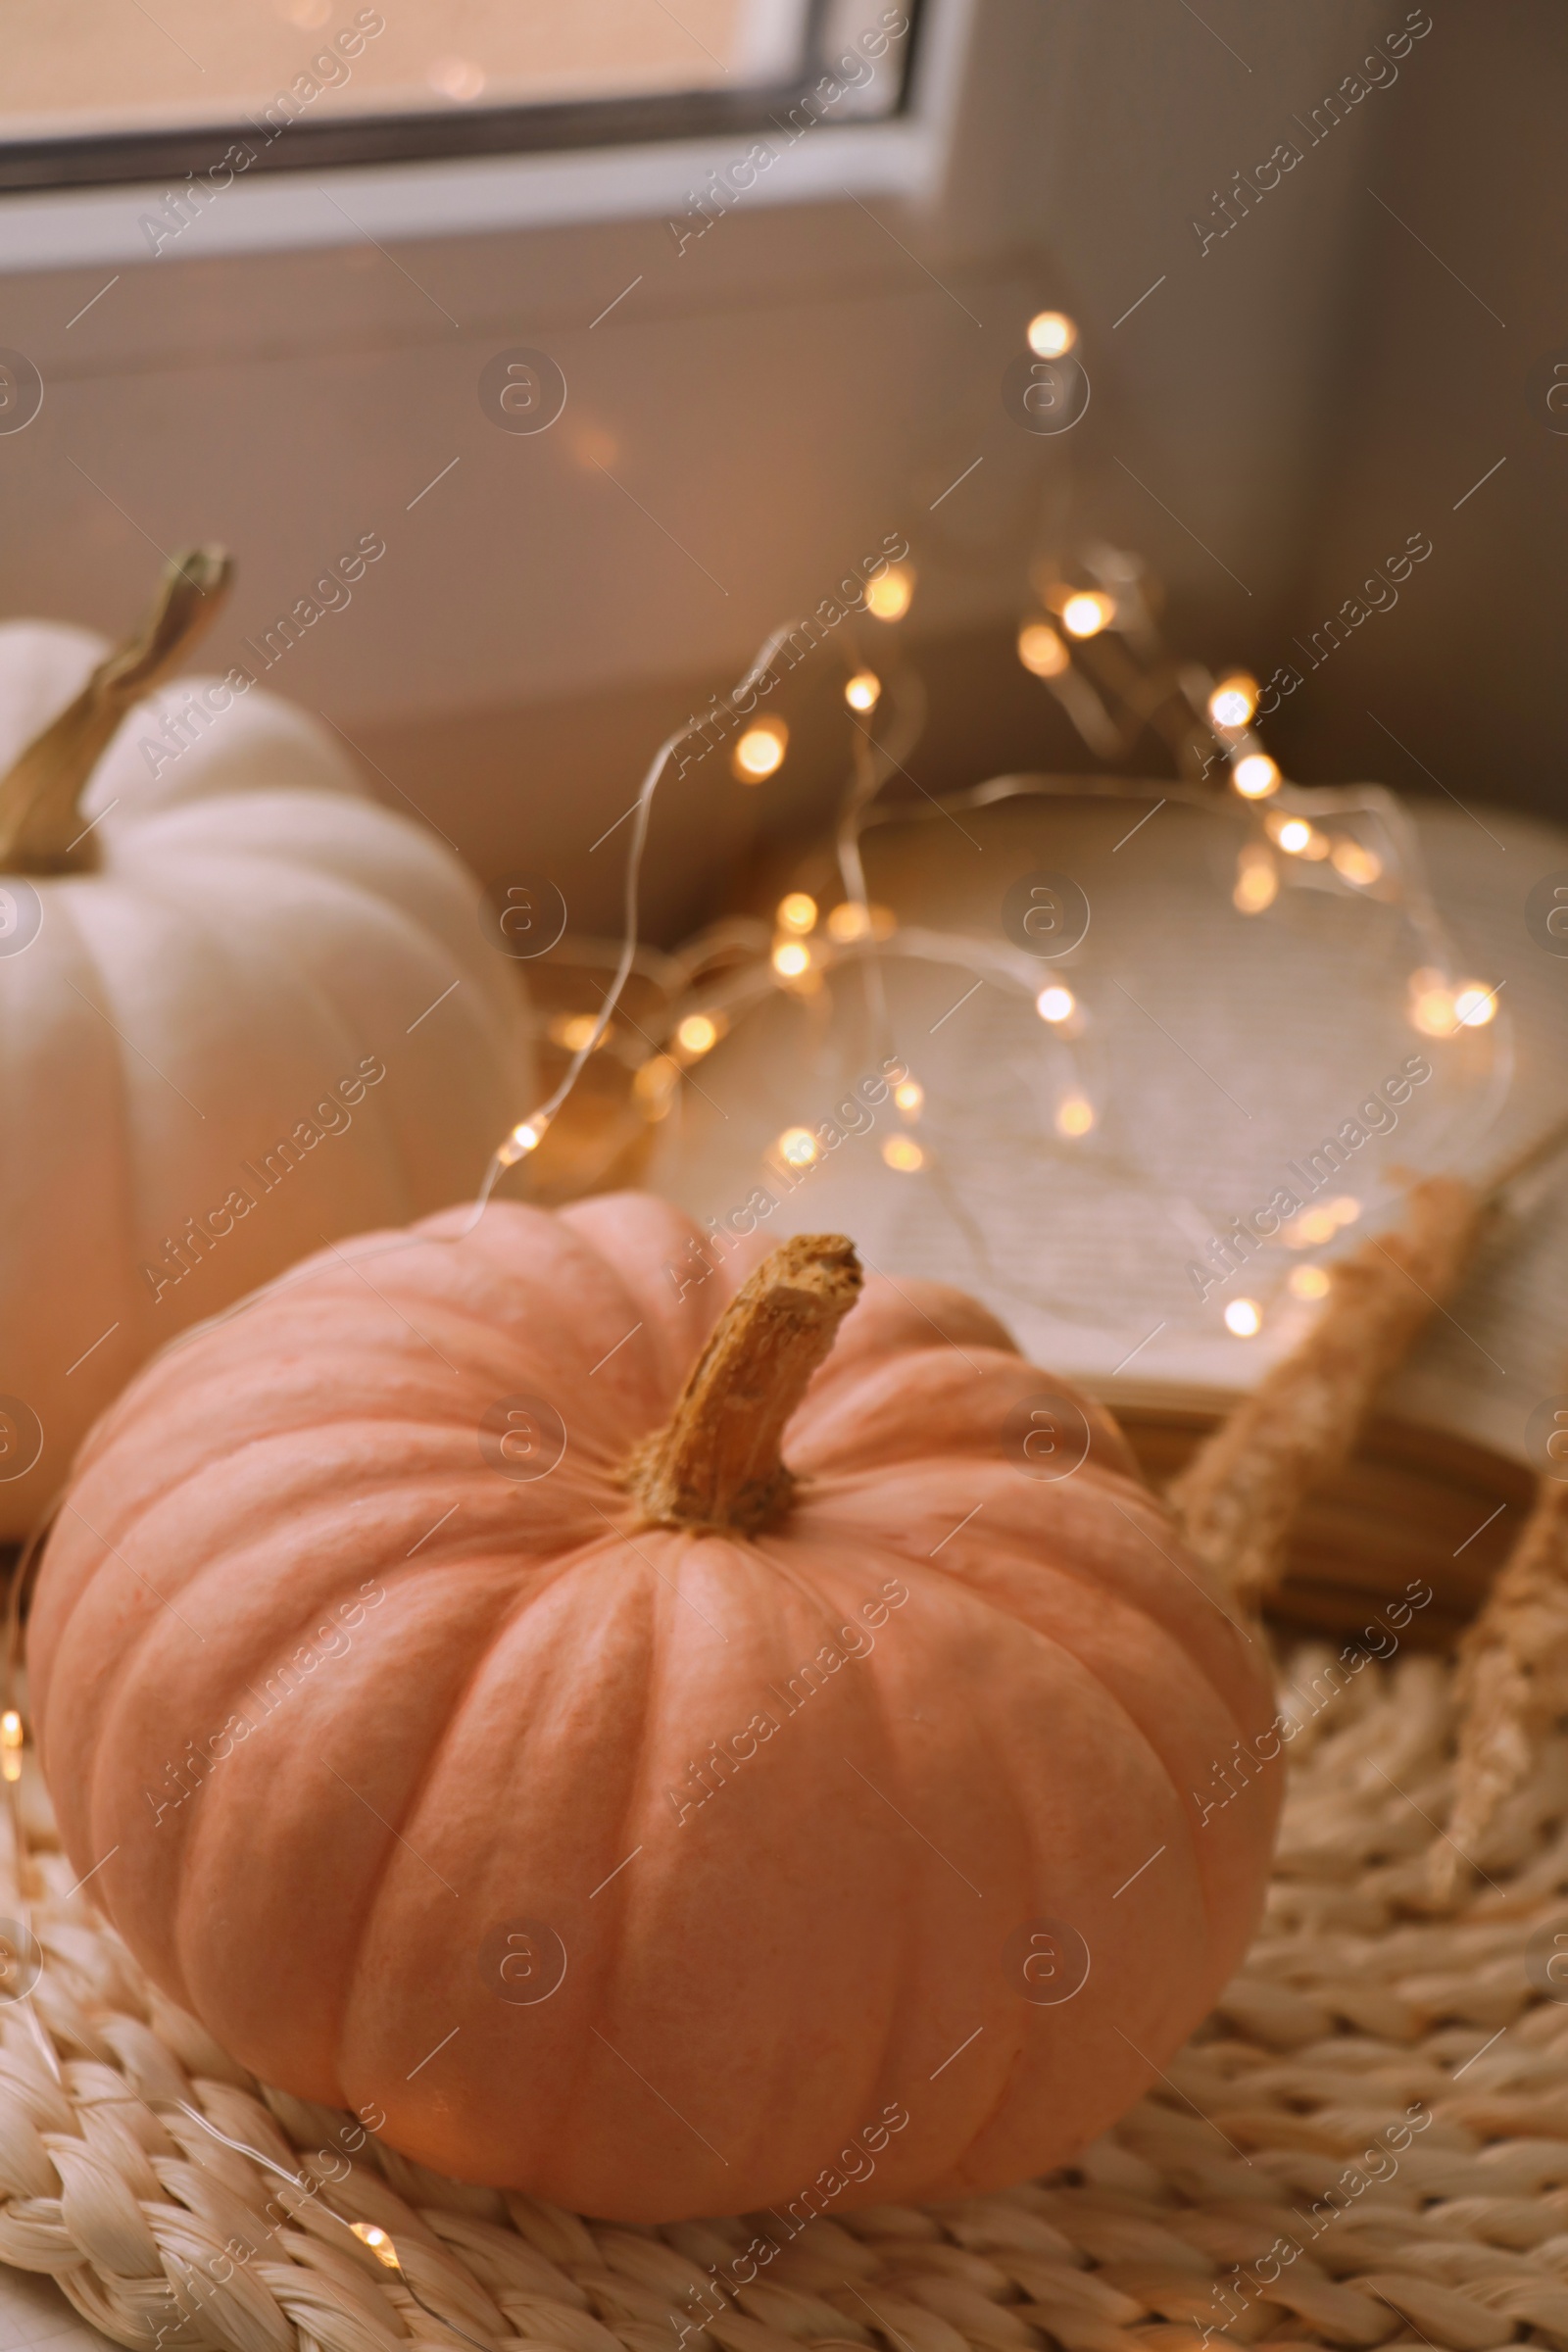 Photo of Pumpkins and festive lights on window sill indoors